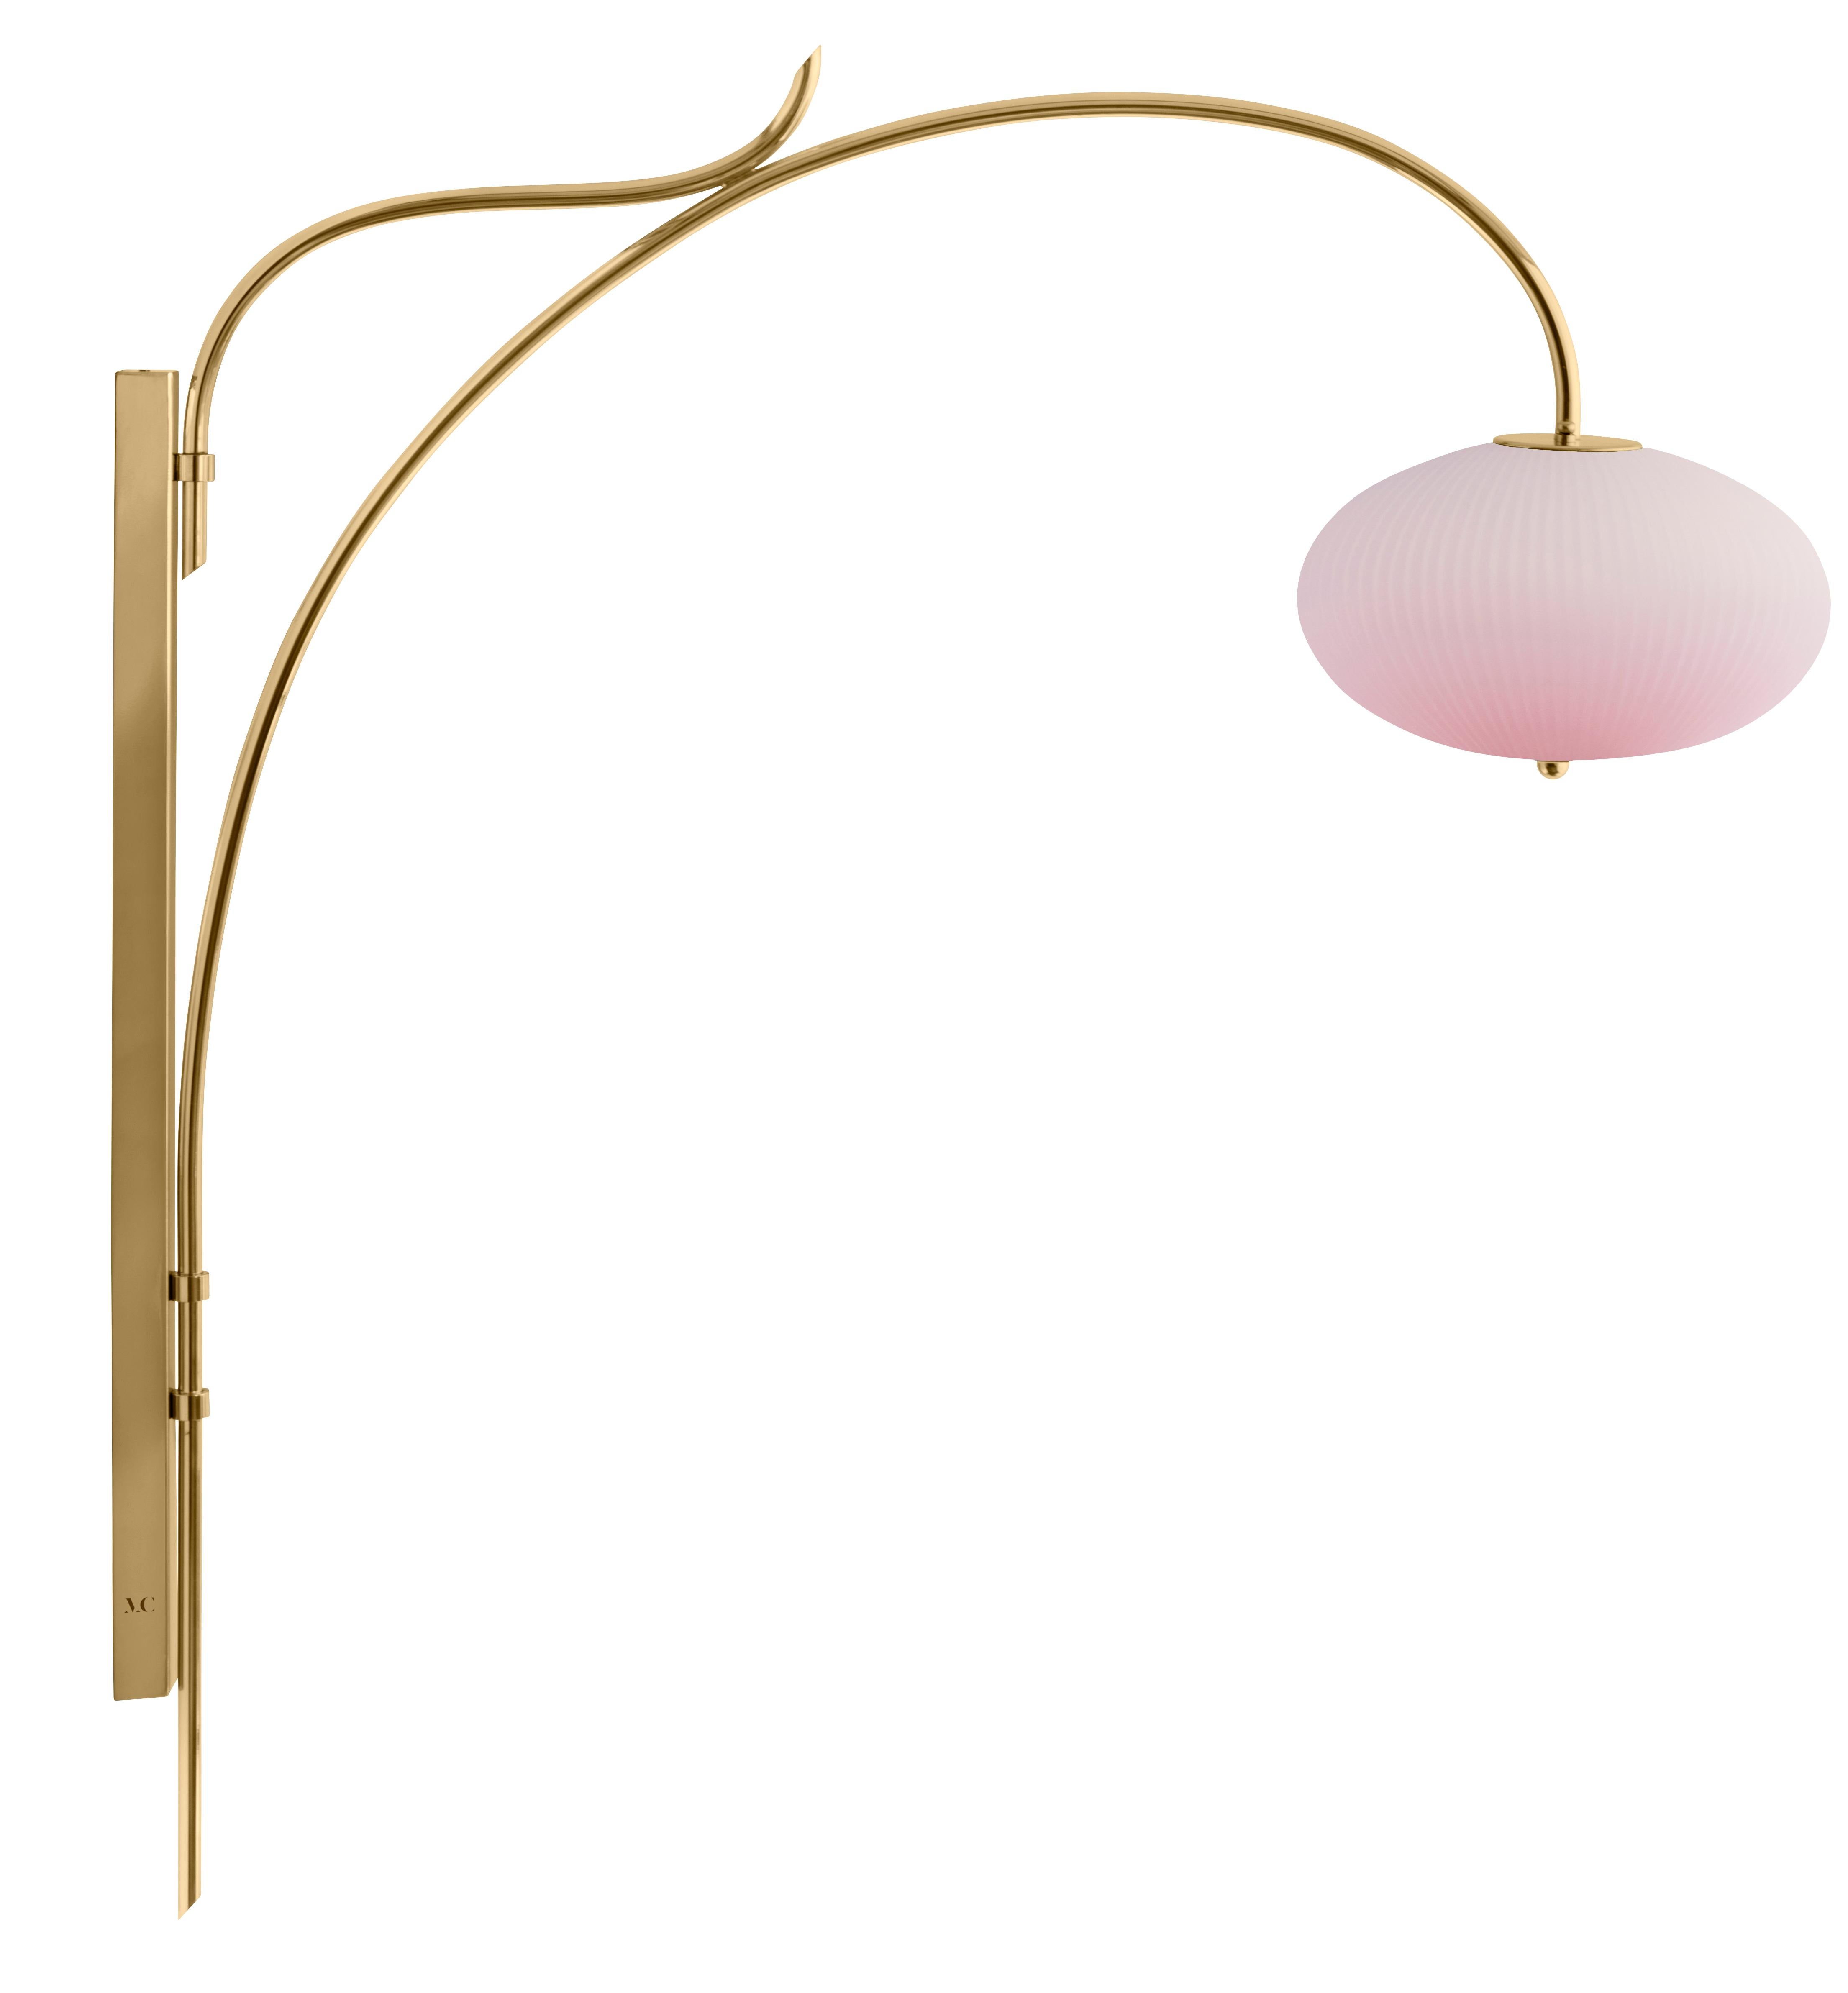 Wall lamp China 07 by Magic Circus Editions
Dimensions: H 120 x W 32 x D 113.5 cm
Materials: Brass, mouth blown glass sculpted with a diamond saw
Colour: soft rose

Available finishes: Brass, nickel
Available colours: enamel soft white, soft